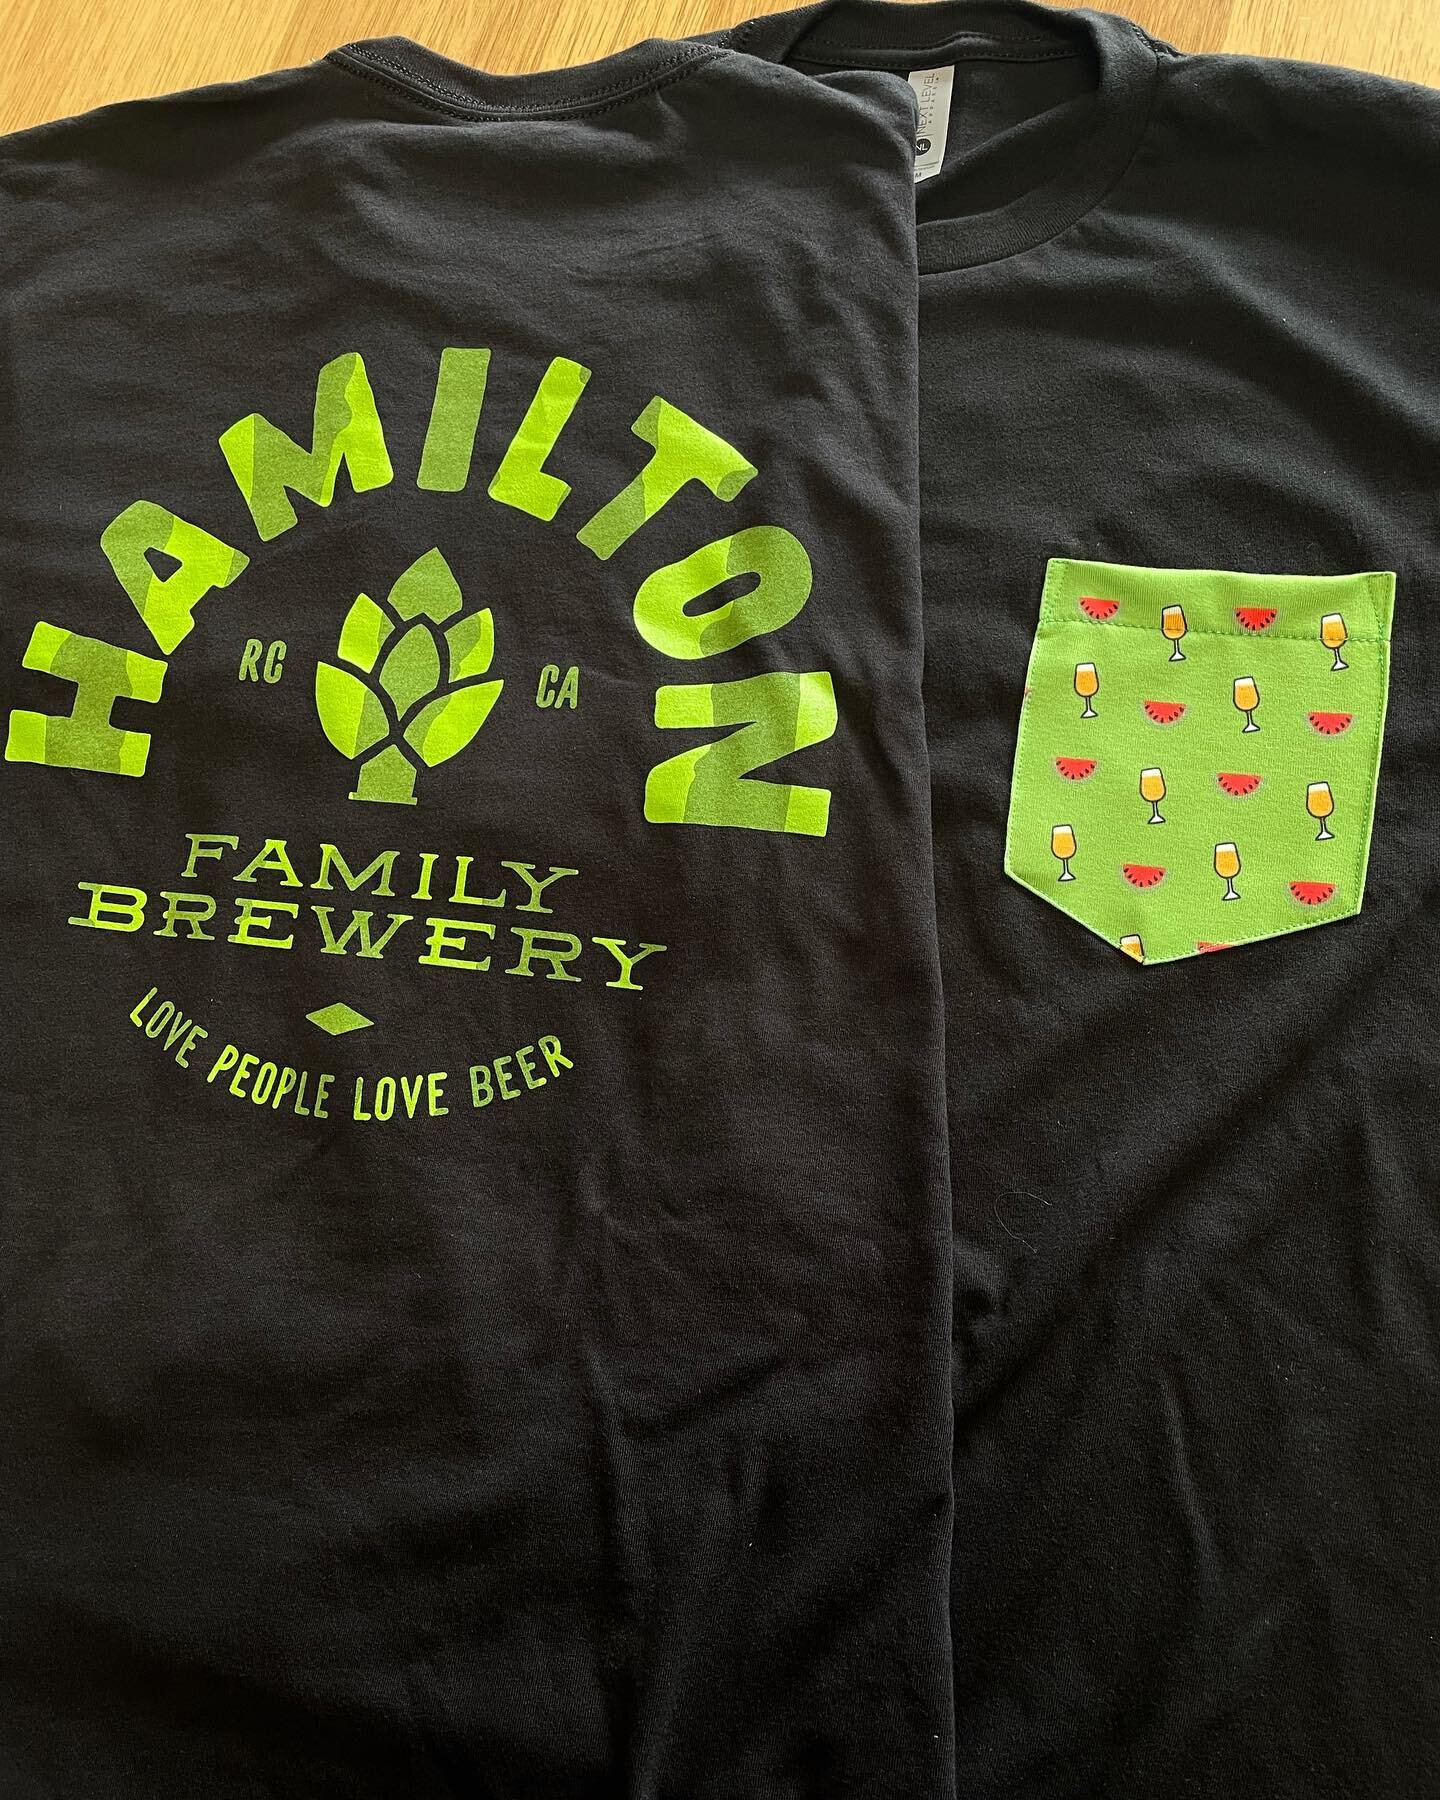 New 🍉 shirts for @hamiltonfamilybrewery Pick one up at their watermelon blonde party!